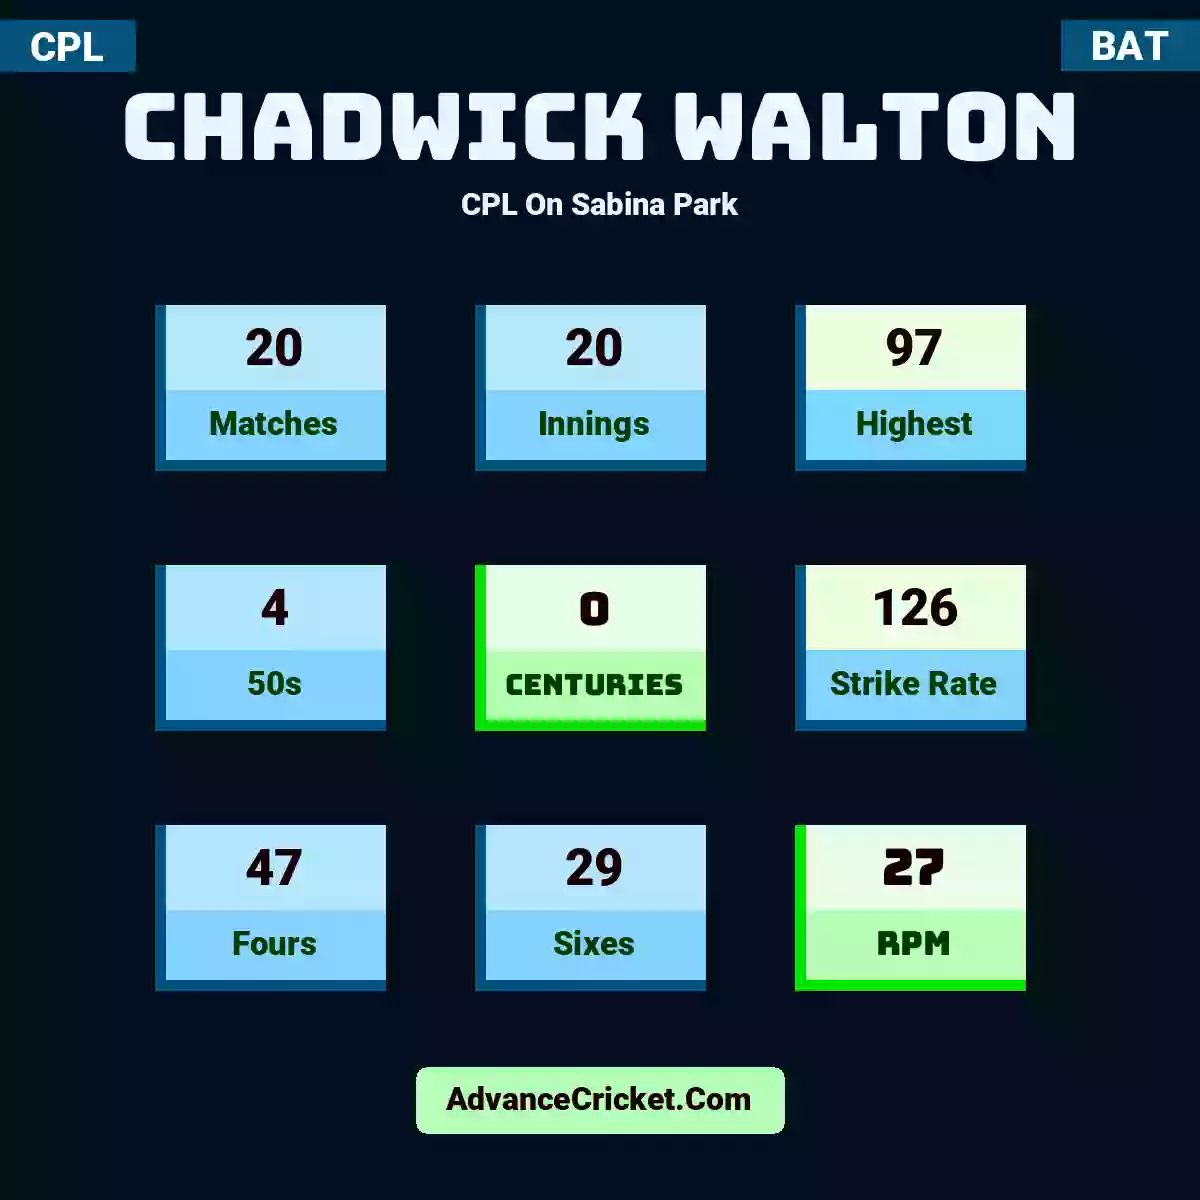 Chadwick Walton CPL  On Sabina Park, Chadwick Walton played 20 matches, scored 97 runs as highest, 4 half-centuries, and 0 centuries, with a strike rate of 126. C.Walton hit 47 fours and 29 sixes, with an RPM of 27.